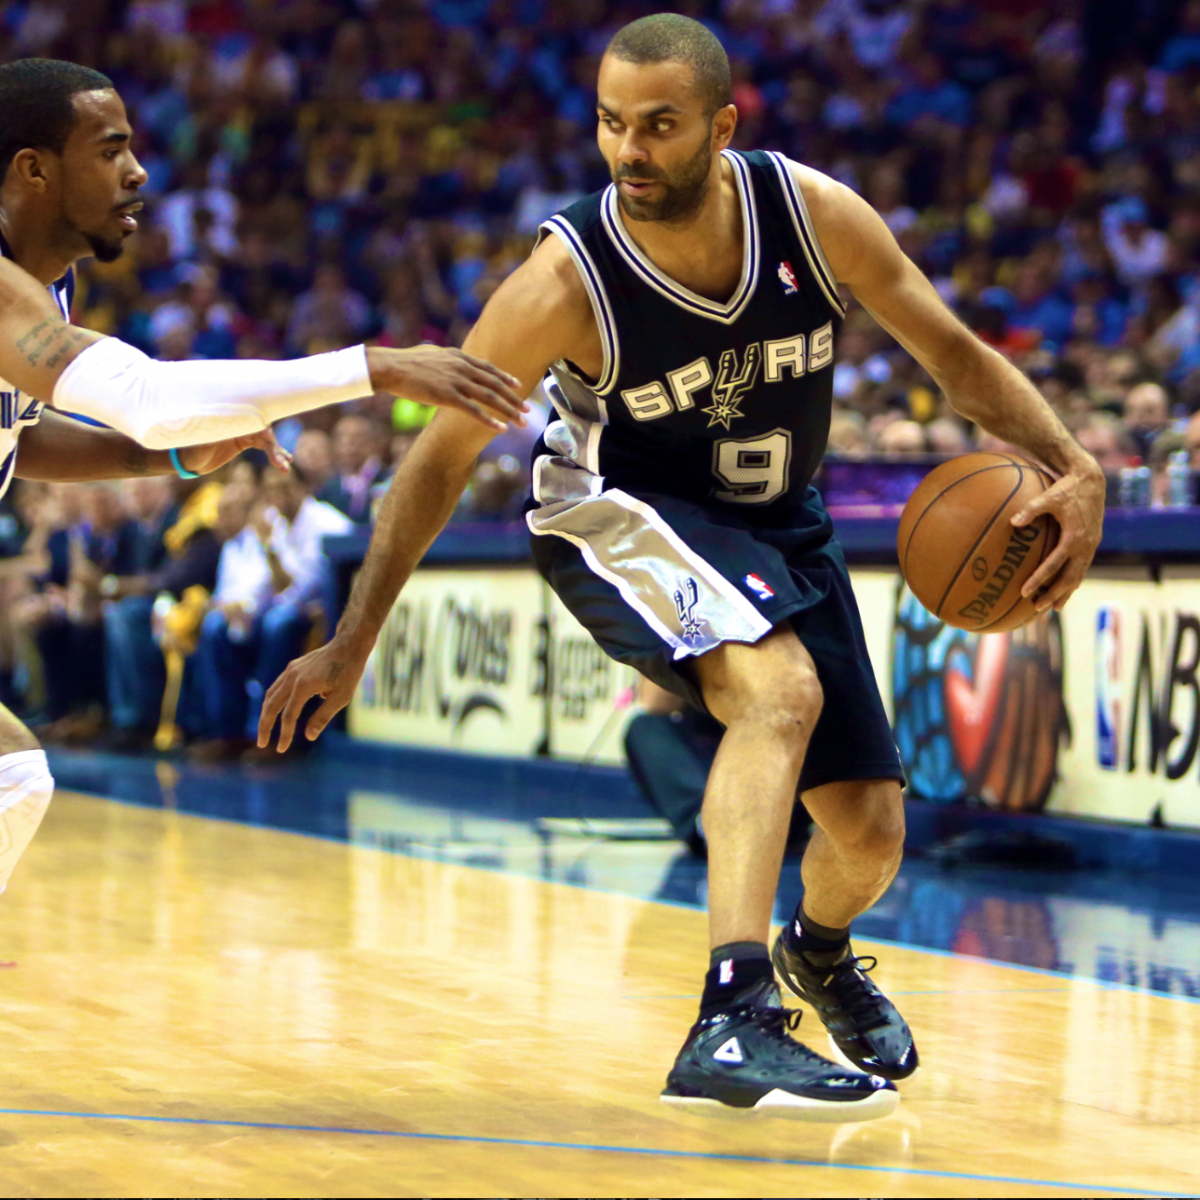 Tony Parker retires: 5 Opta facts about the point guard's legendary career